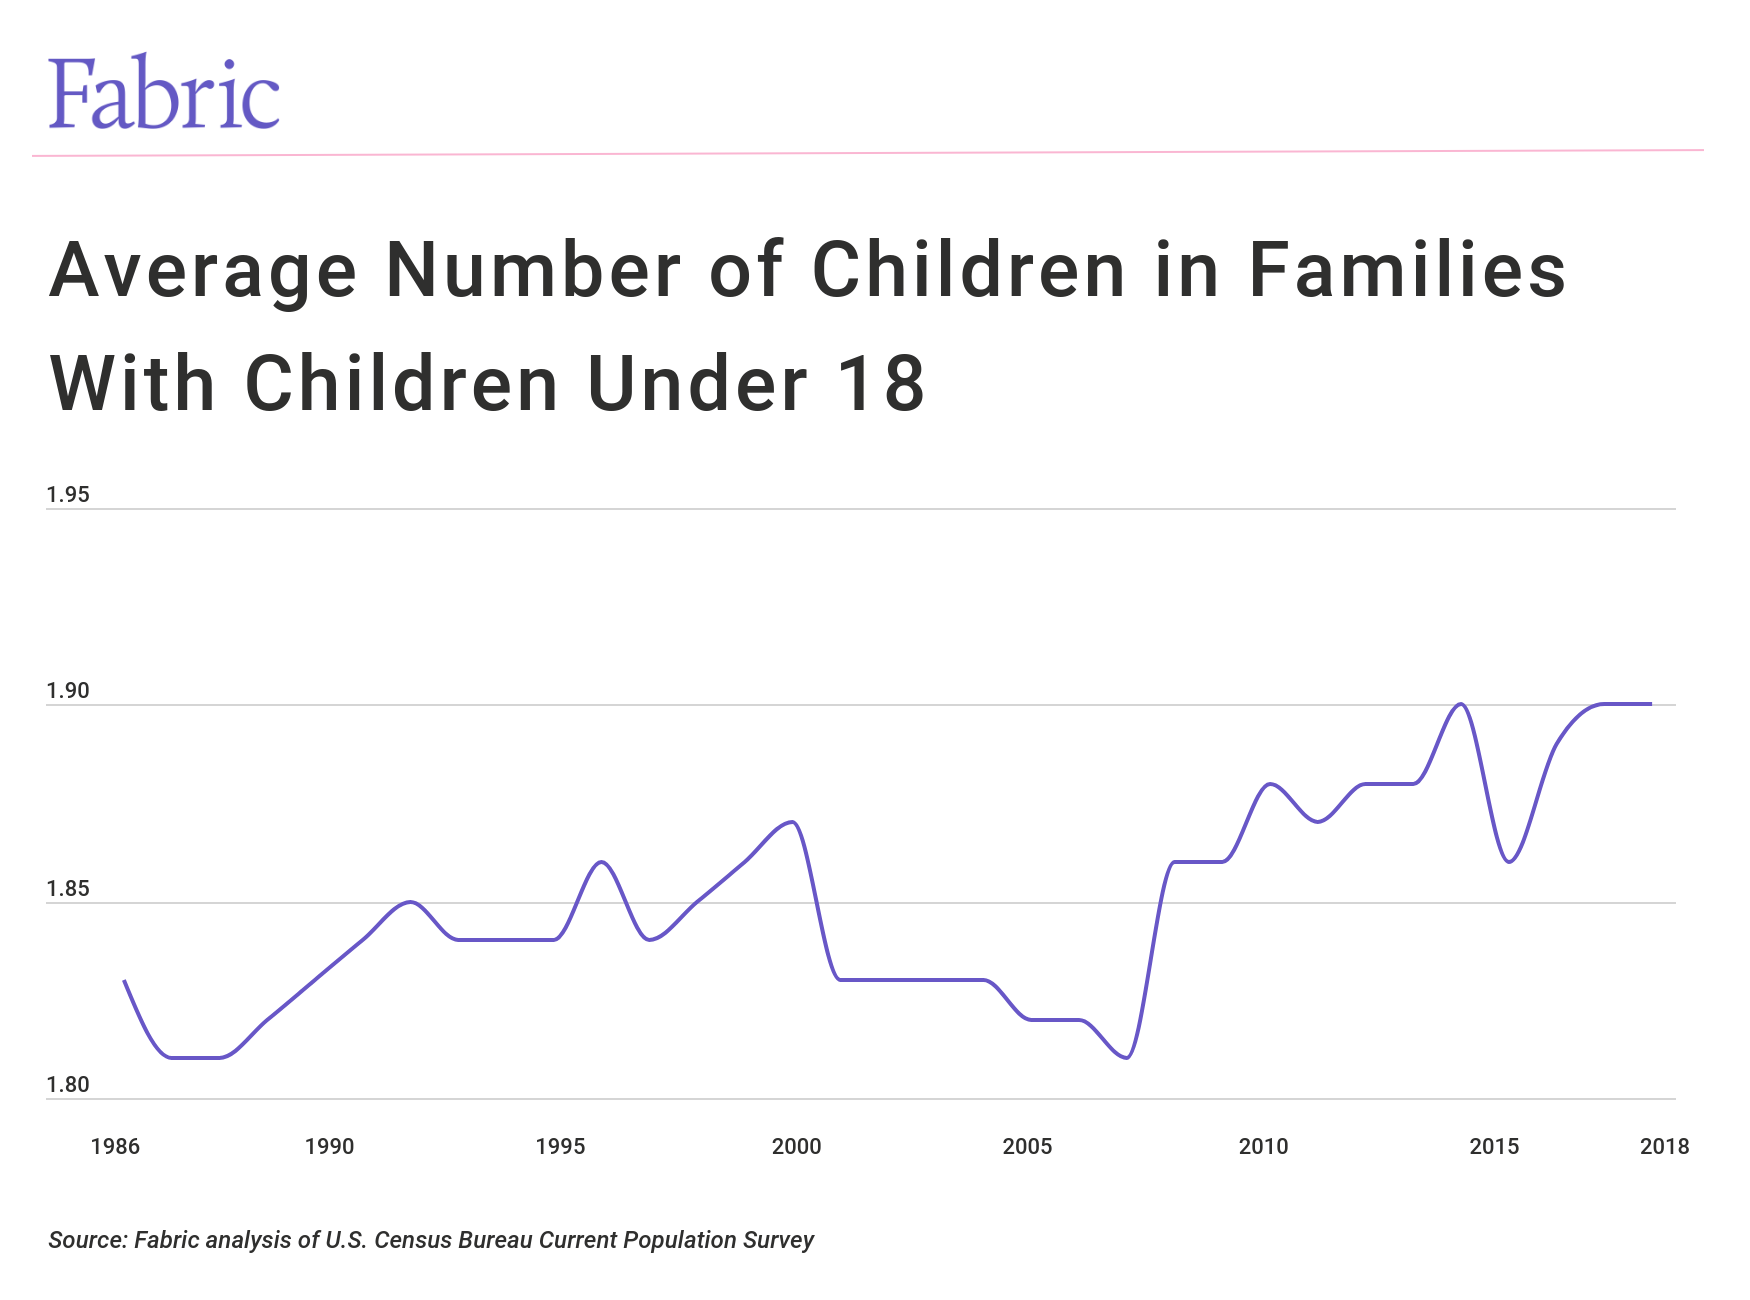 The average number of children (in families with kids under 18) has been increasing